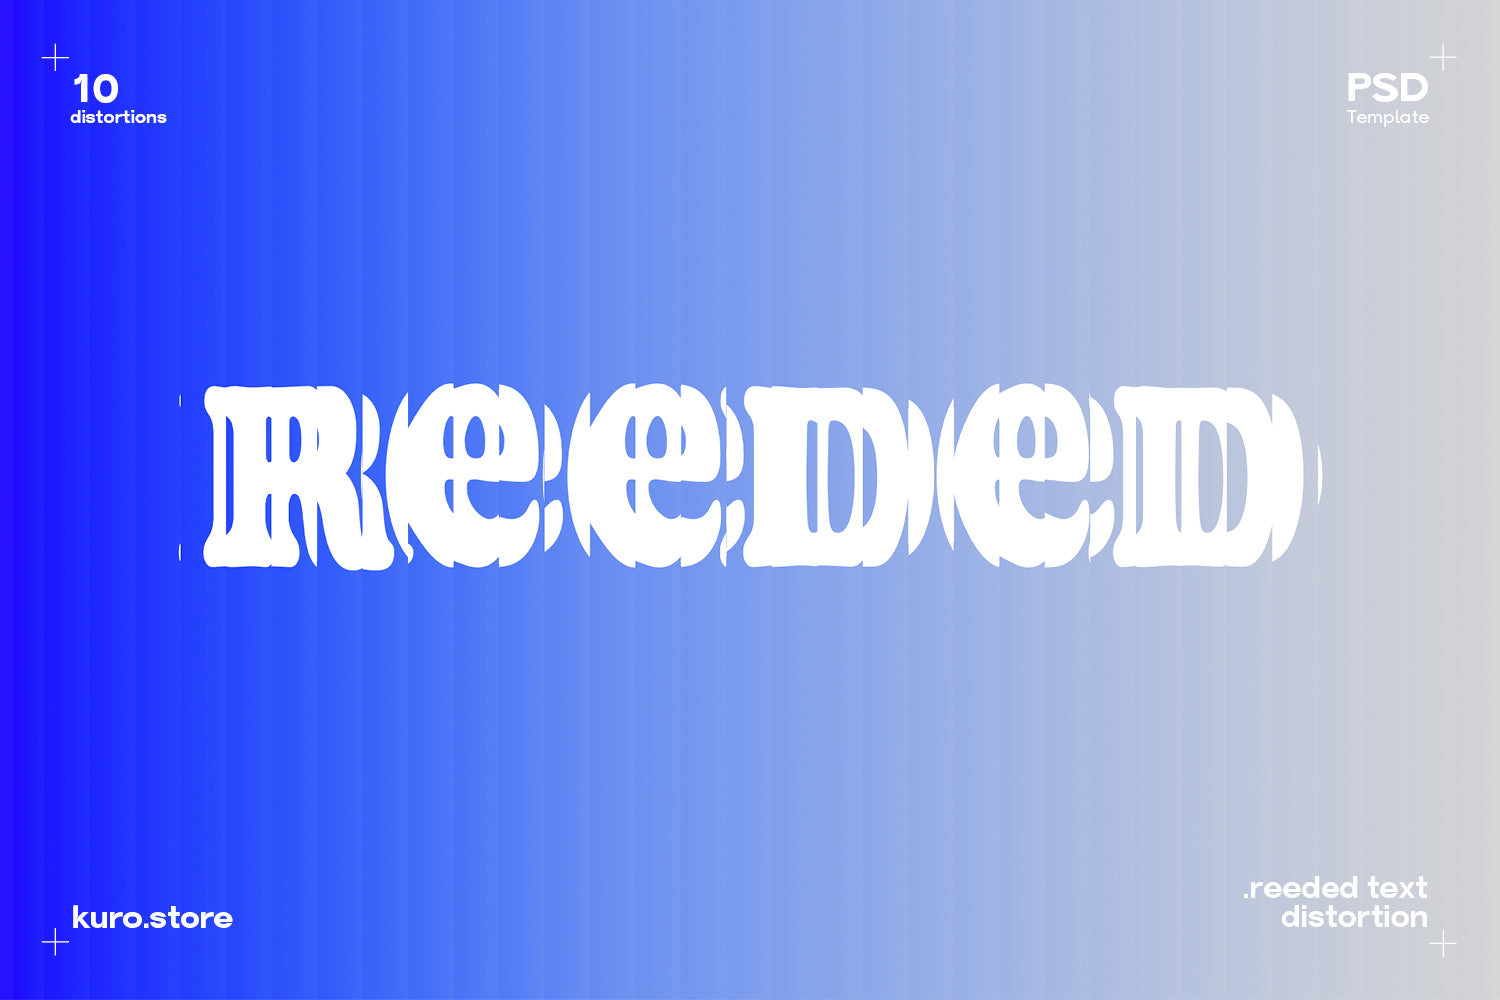 Reeded Text Distortion Effect